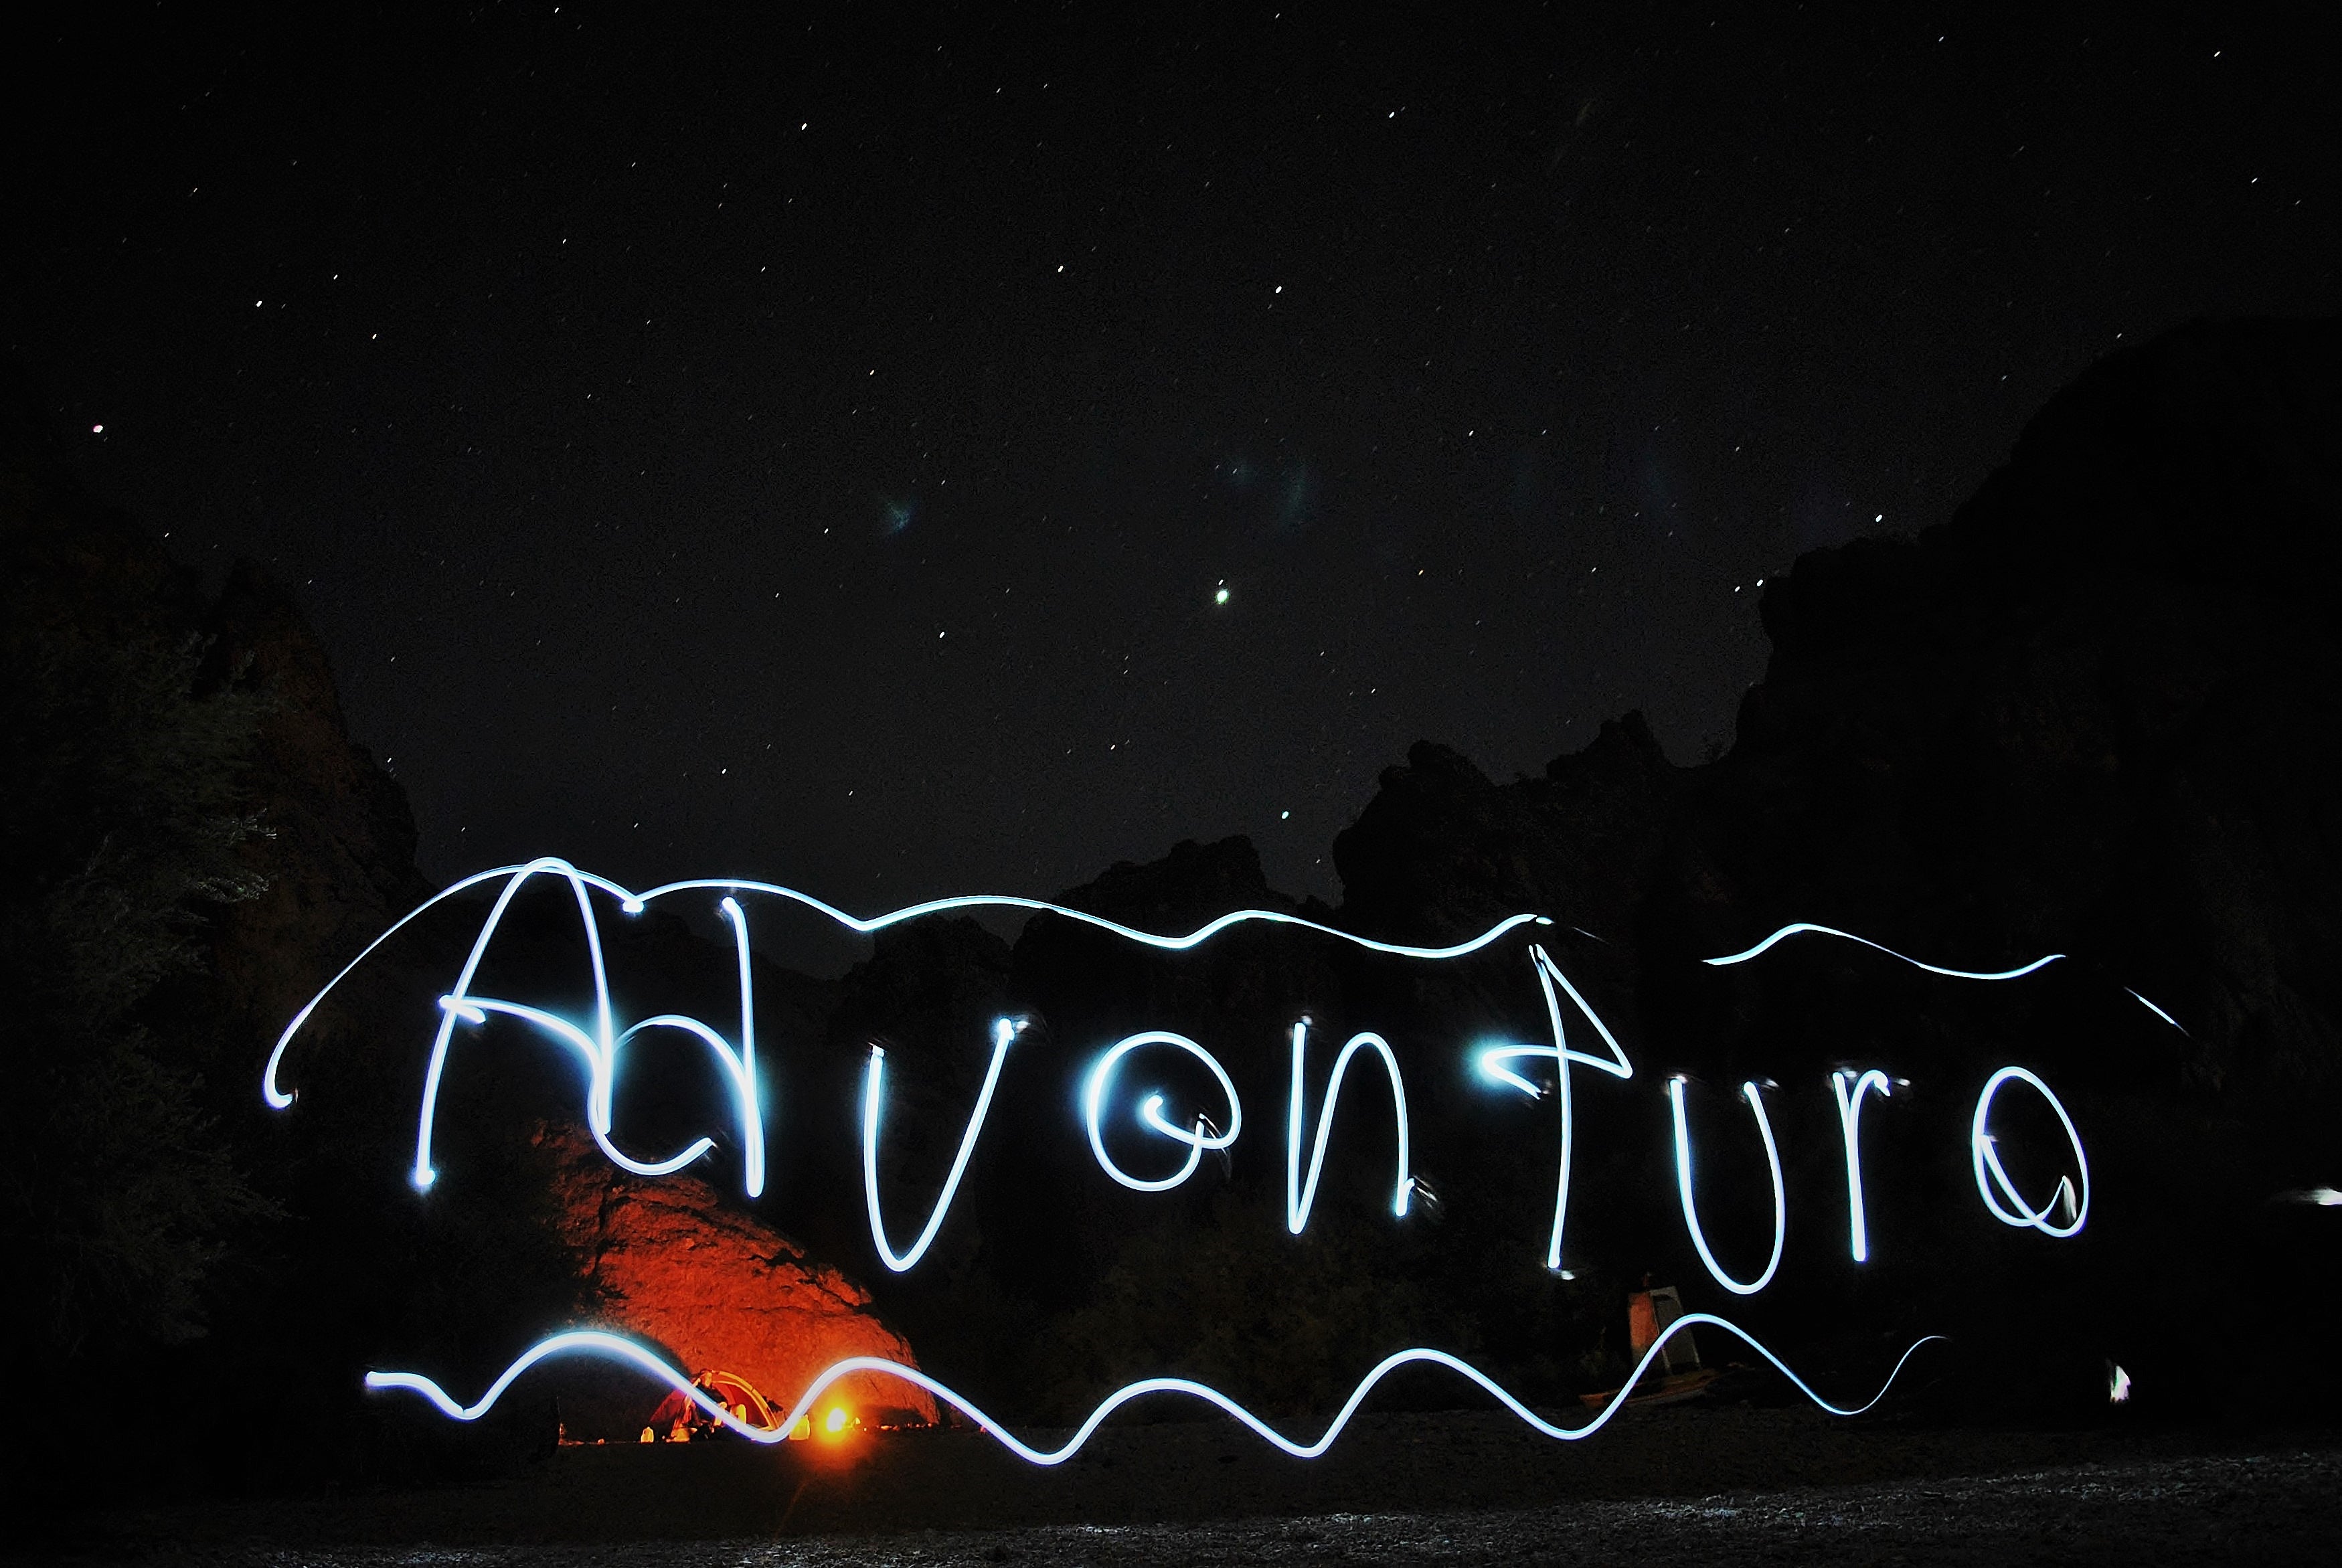 Light painting from the beach